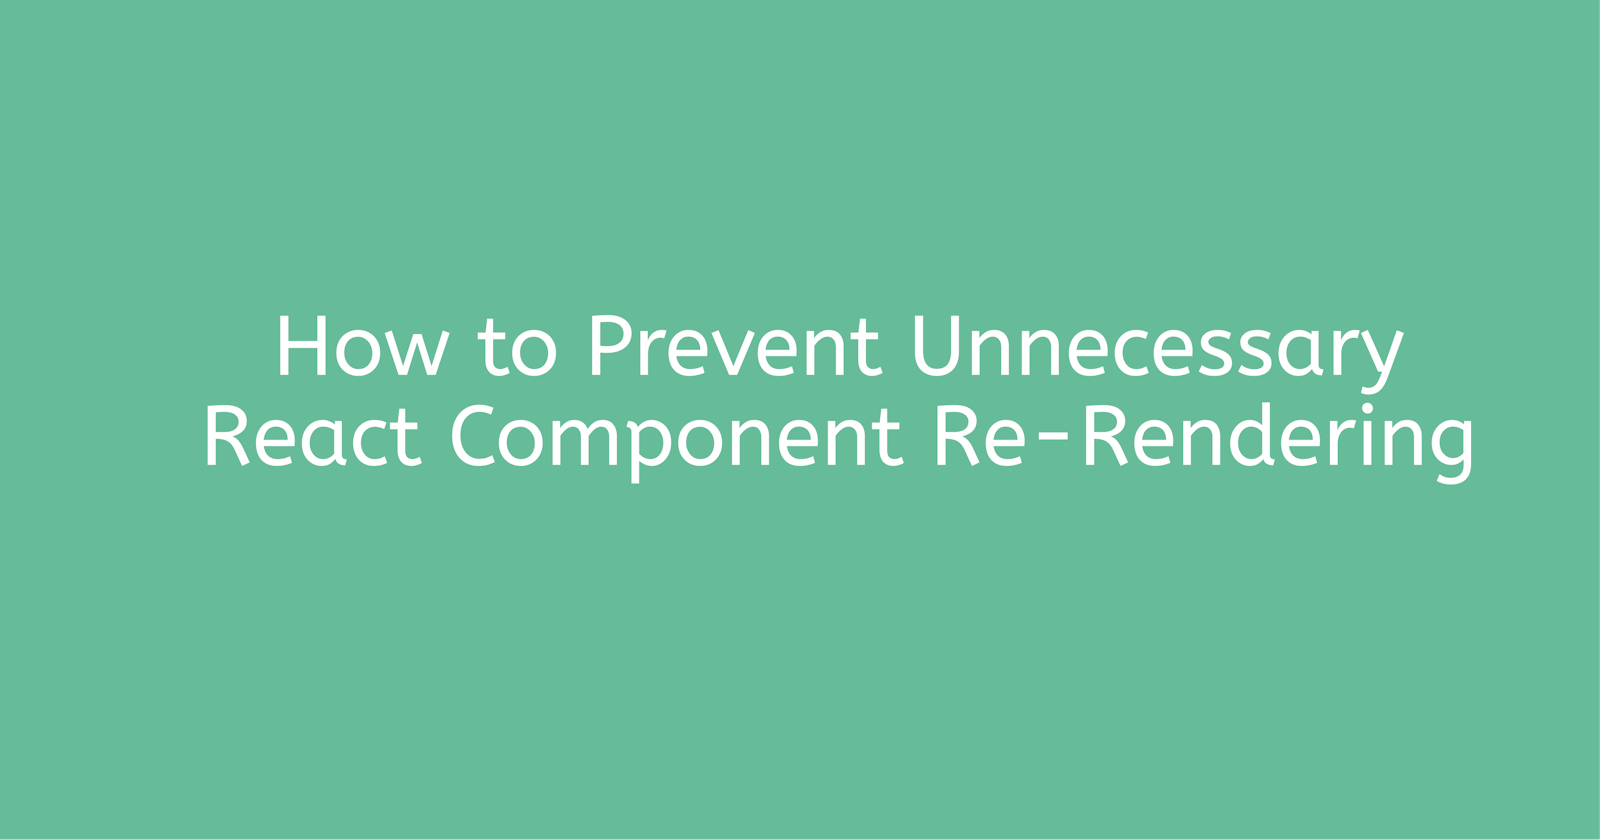 How to Prevent Unnecessary React Component Re-Rendering